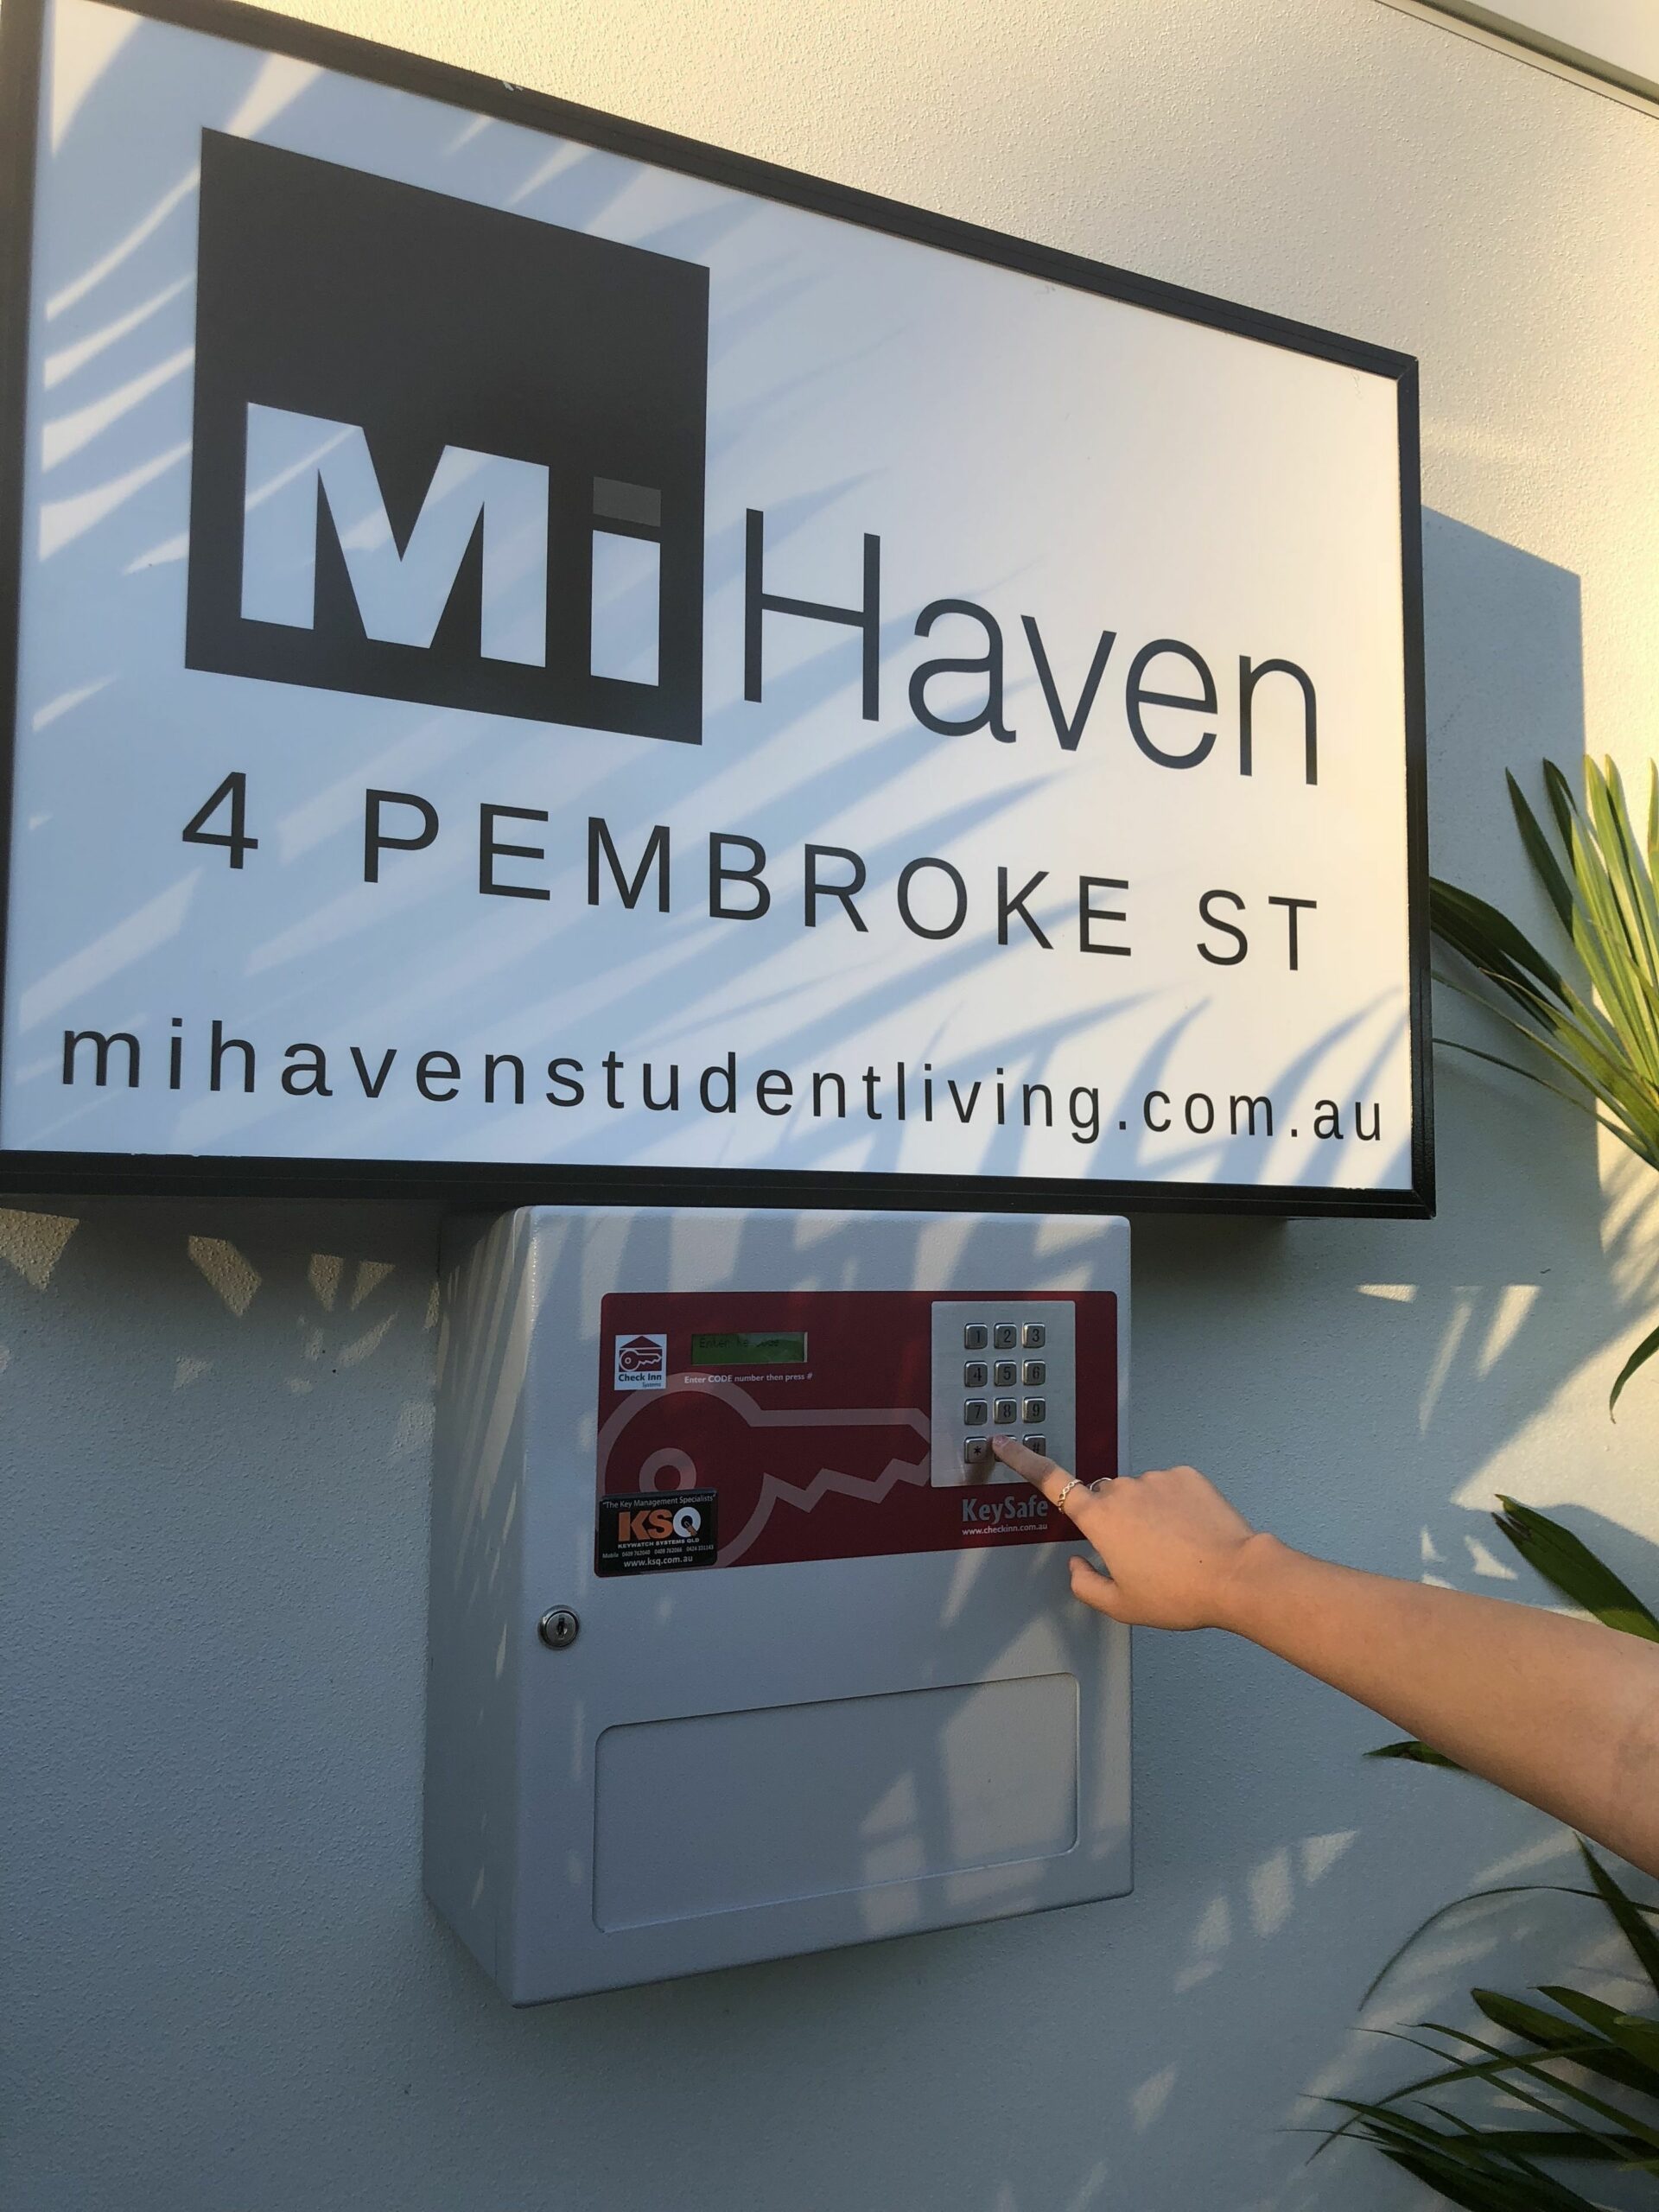 MiHaven Student Living - Student Accommodation